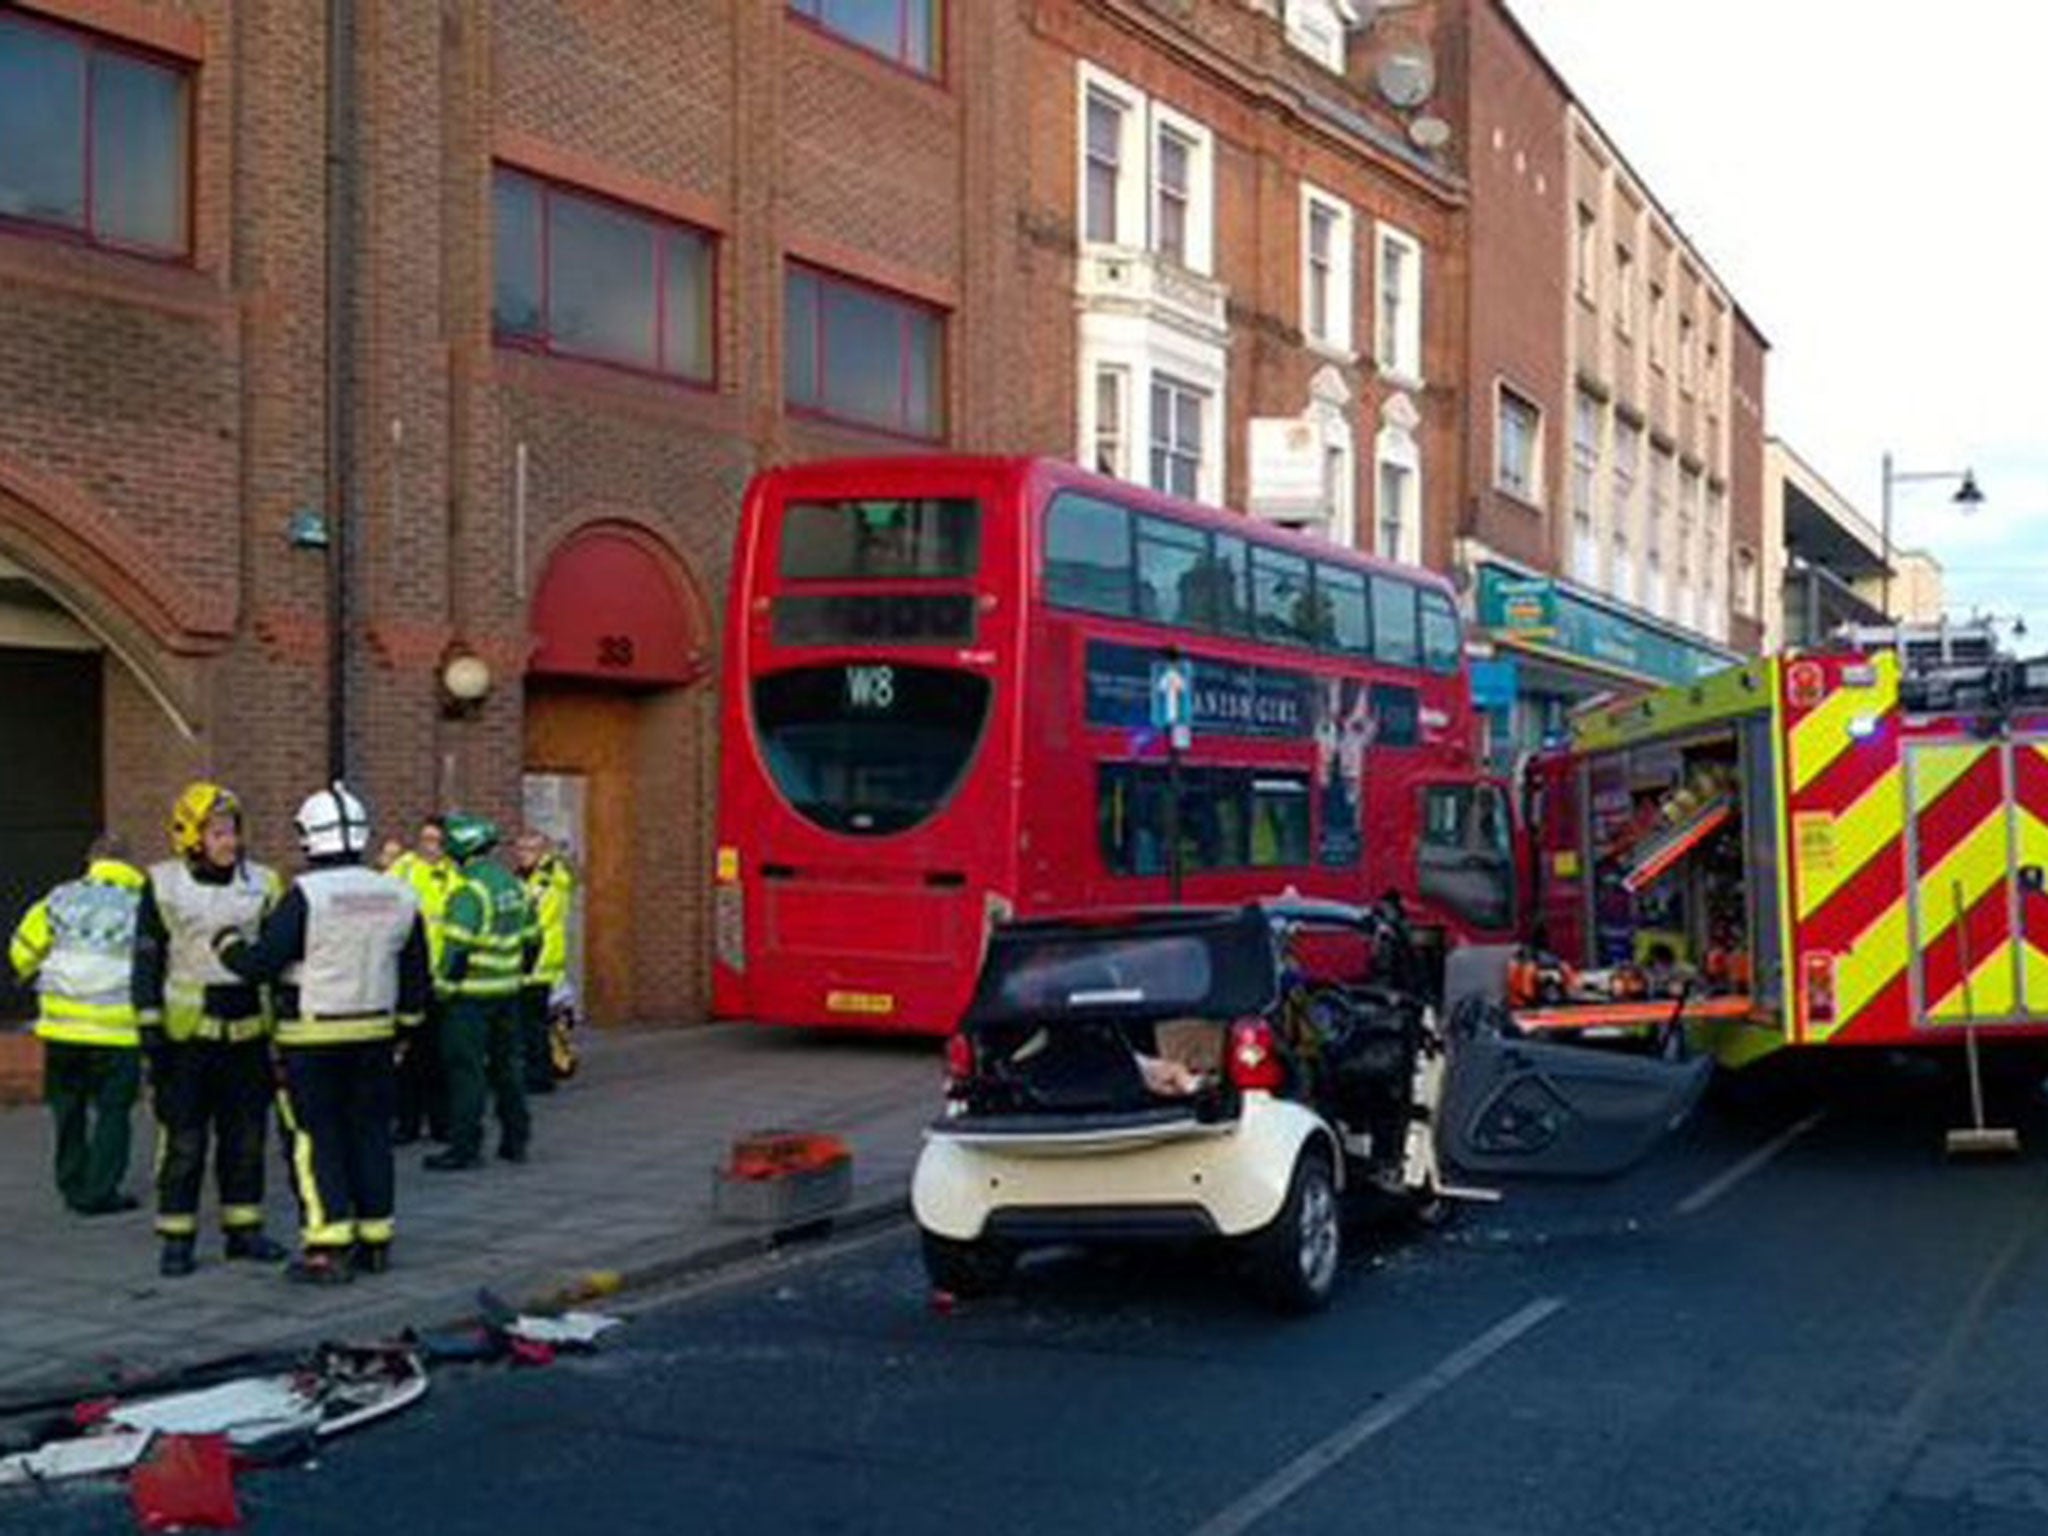 Emergency services attend a crash involving a smart car and a double-decker bus which mounted a kerb in London Road, Enfield